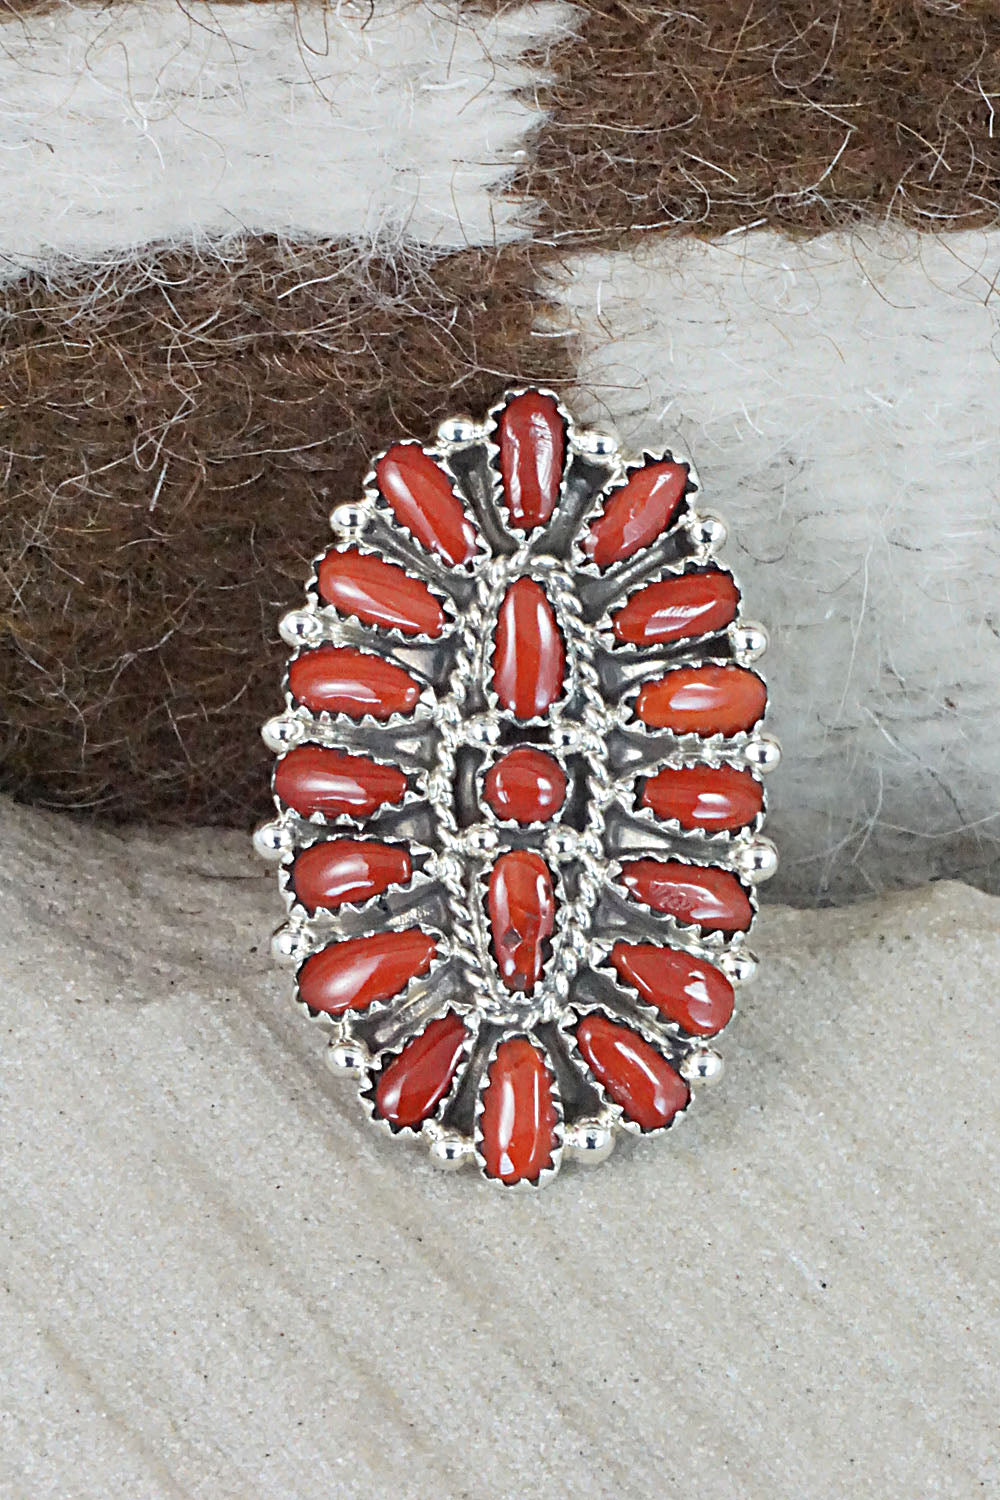 Coral and Sterling Silver Ring - Donovan Wilson - Size 8